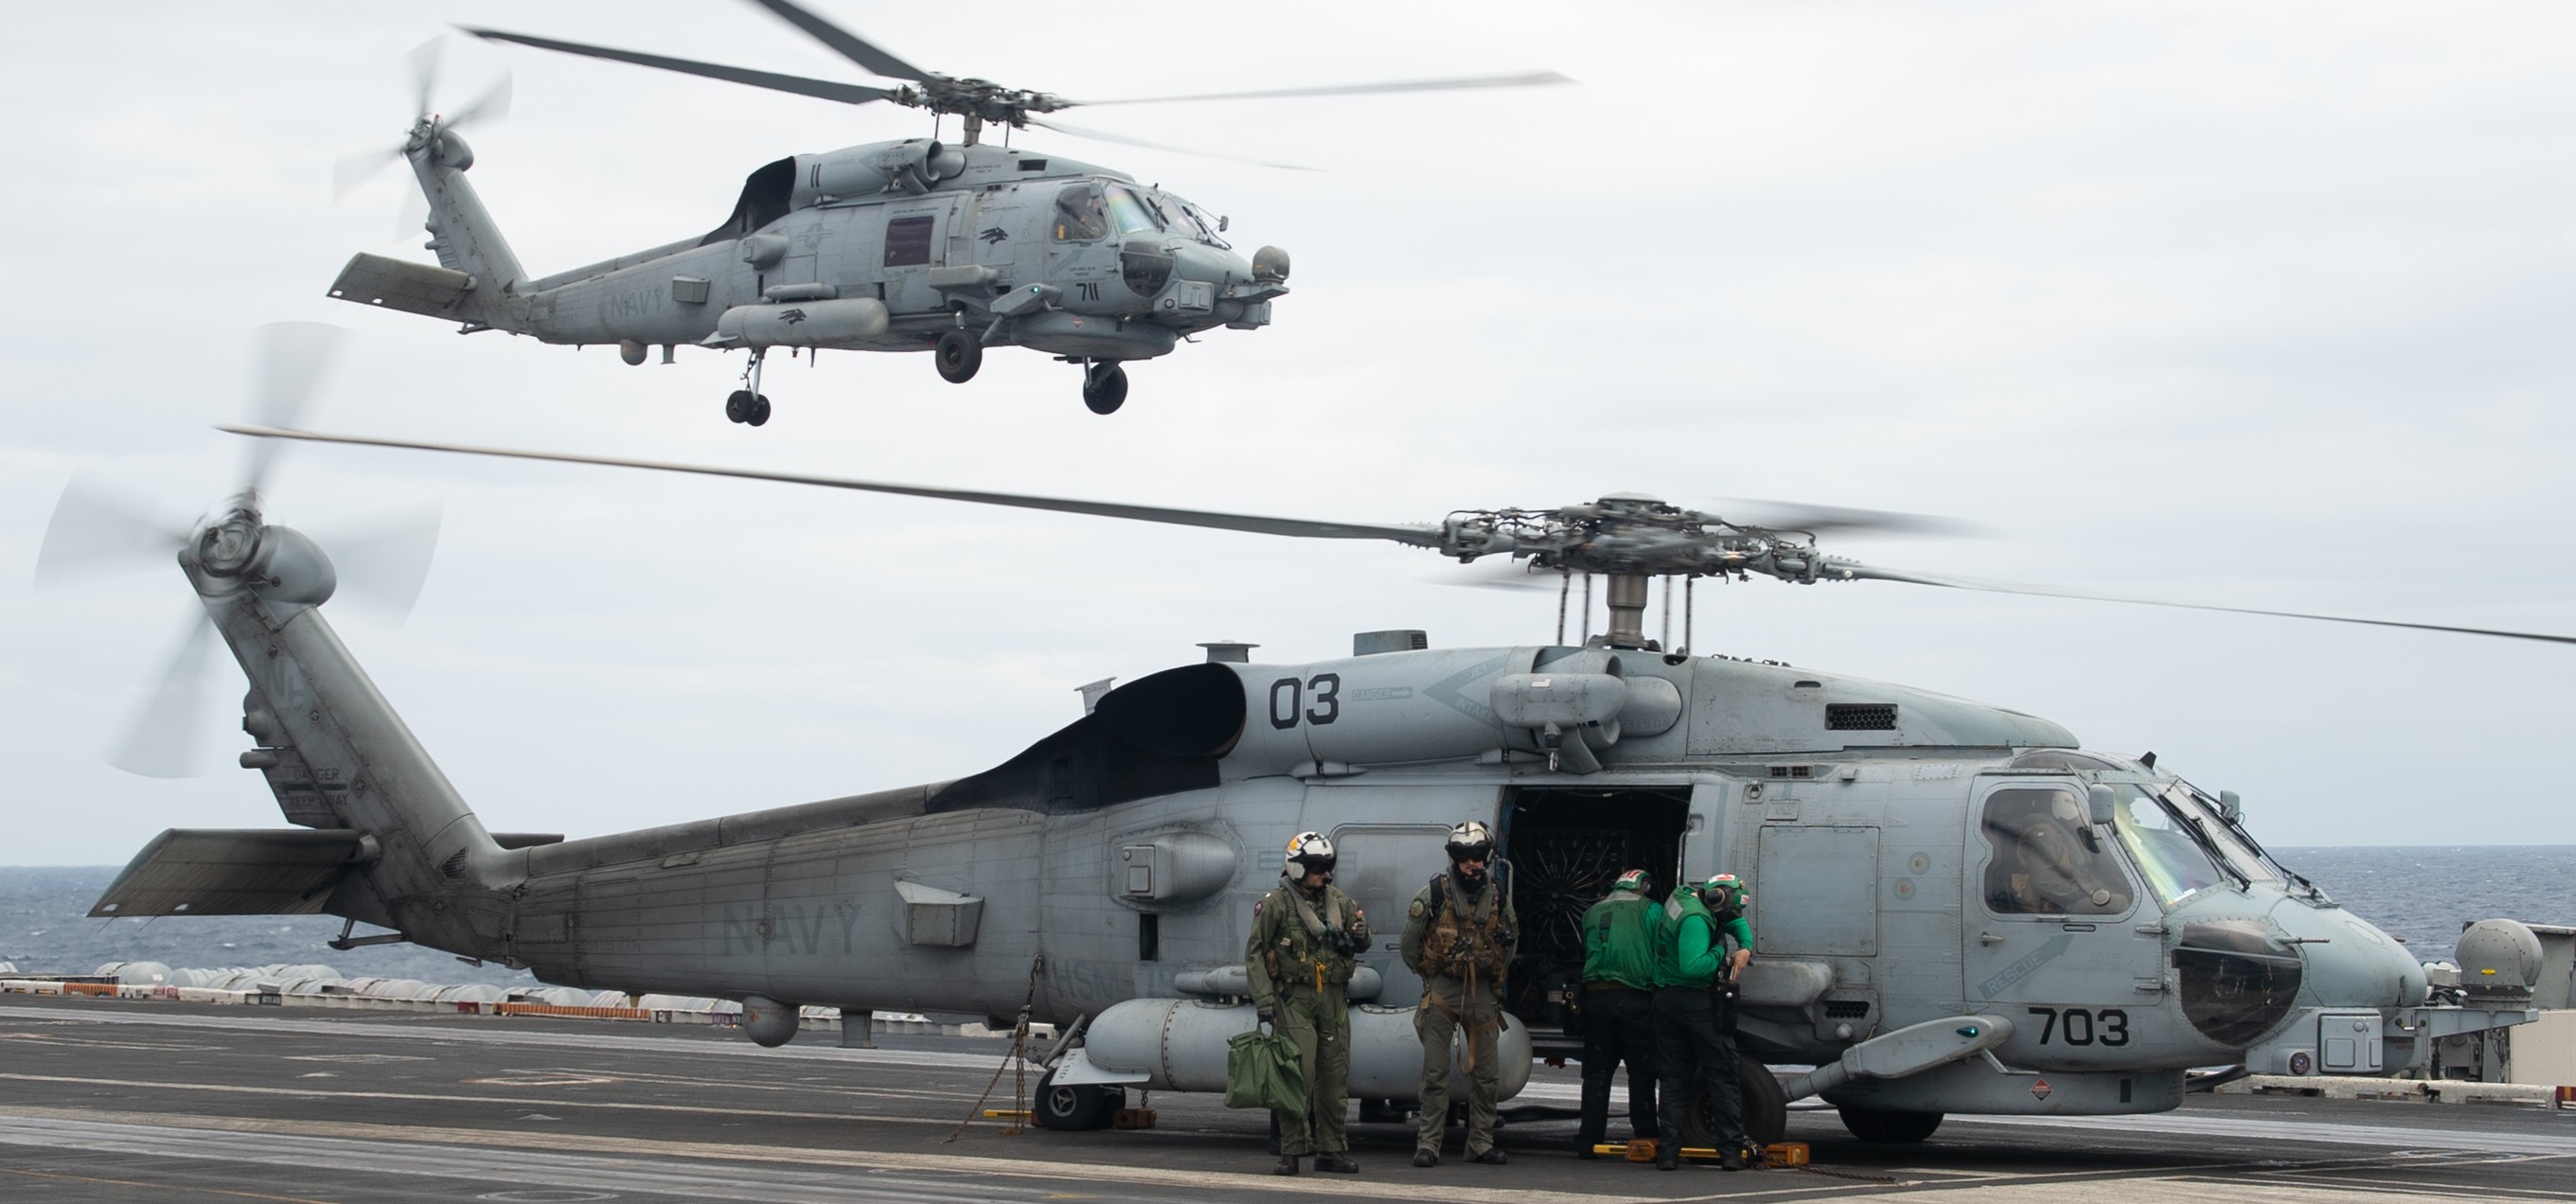 hsm-75 wolf pack helicopter maritime strike squadron mh-60r seahawk cvw-11 cvn-71 uss theodore roosevelt 88